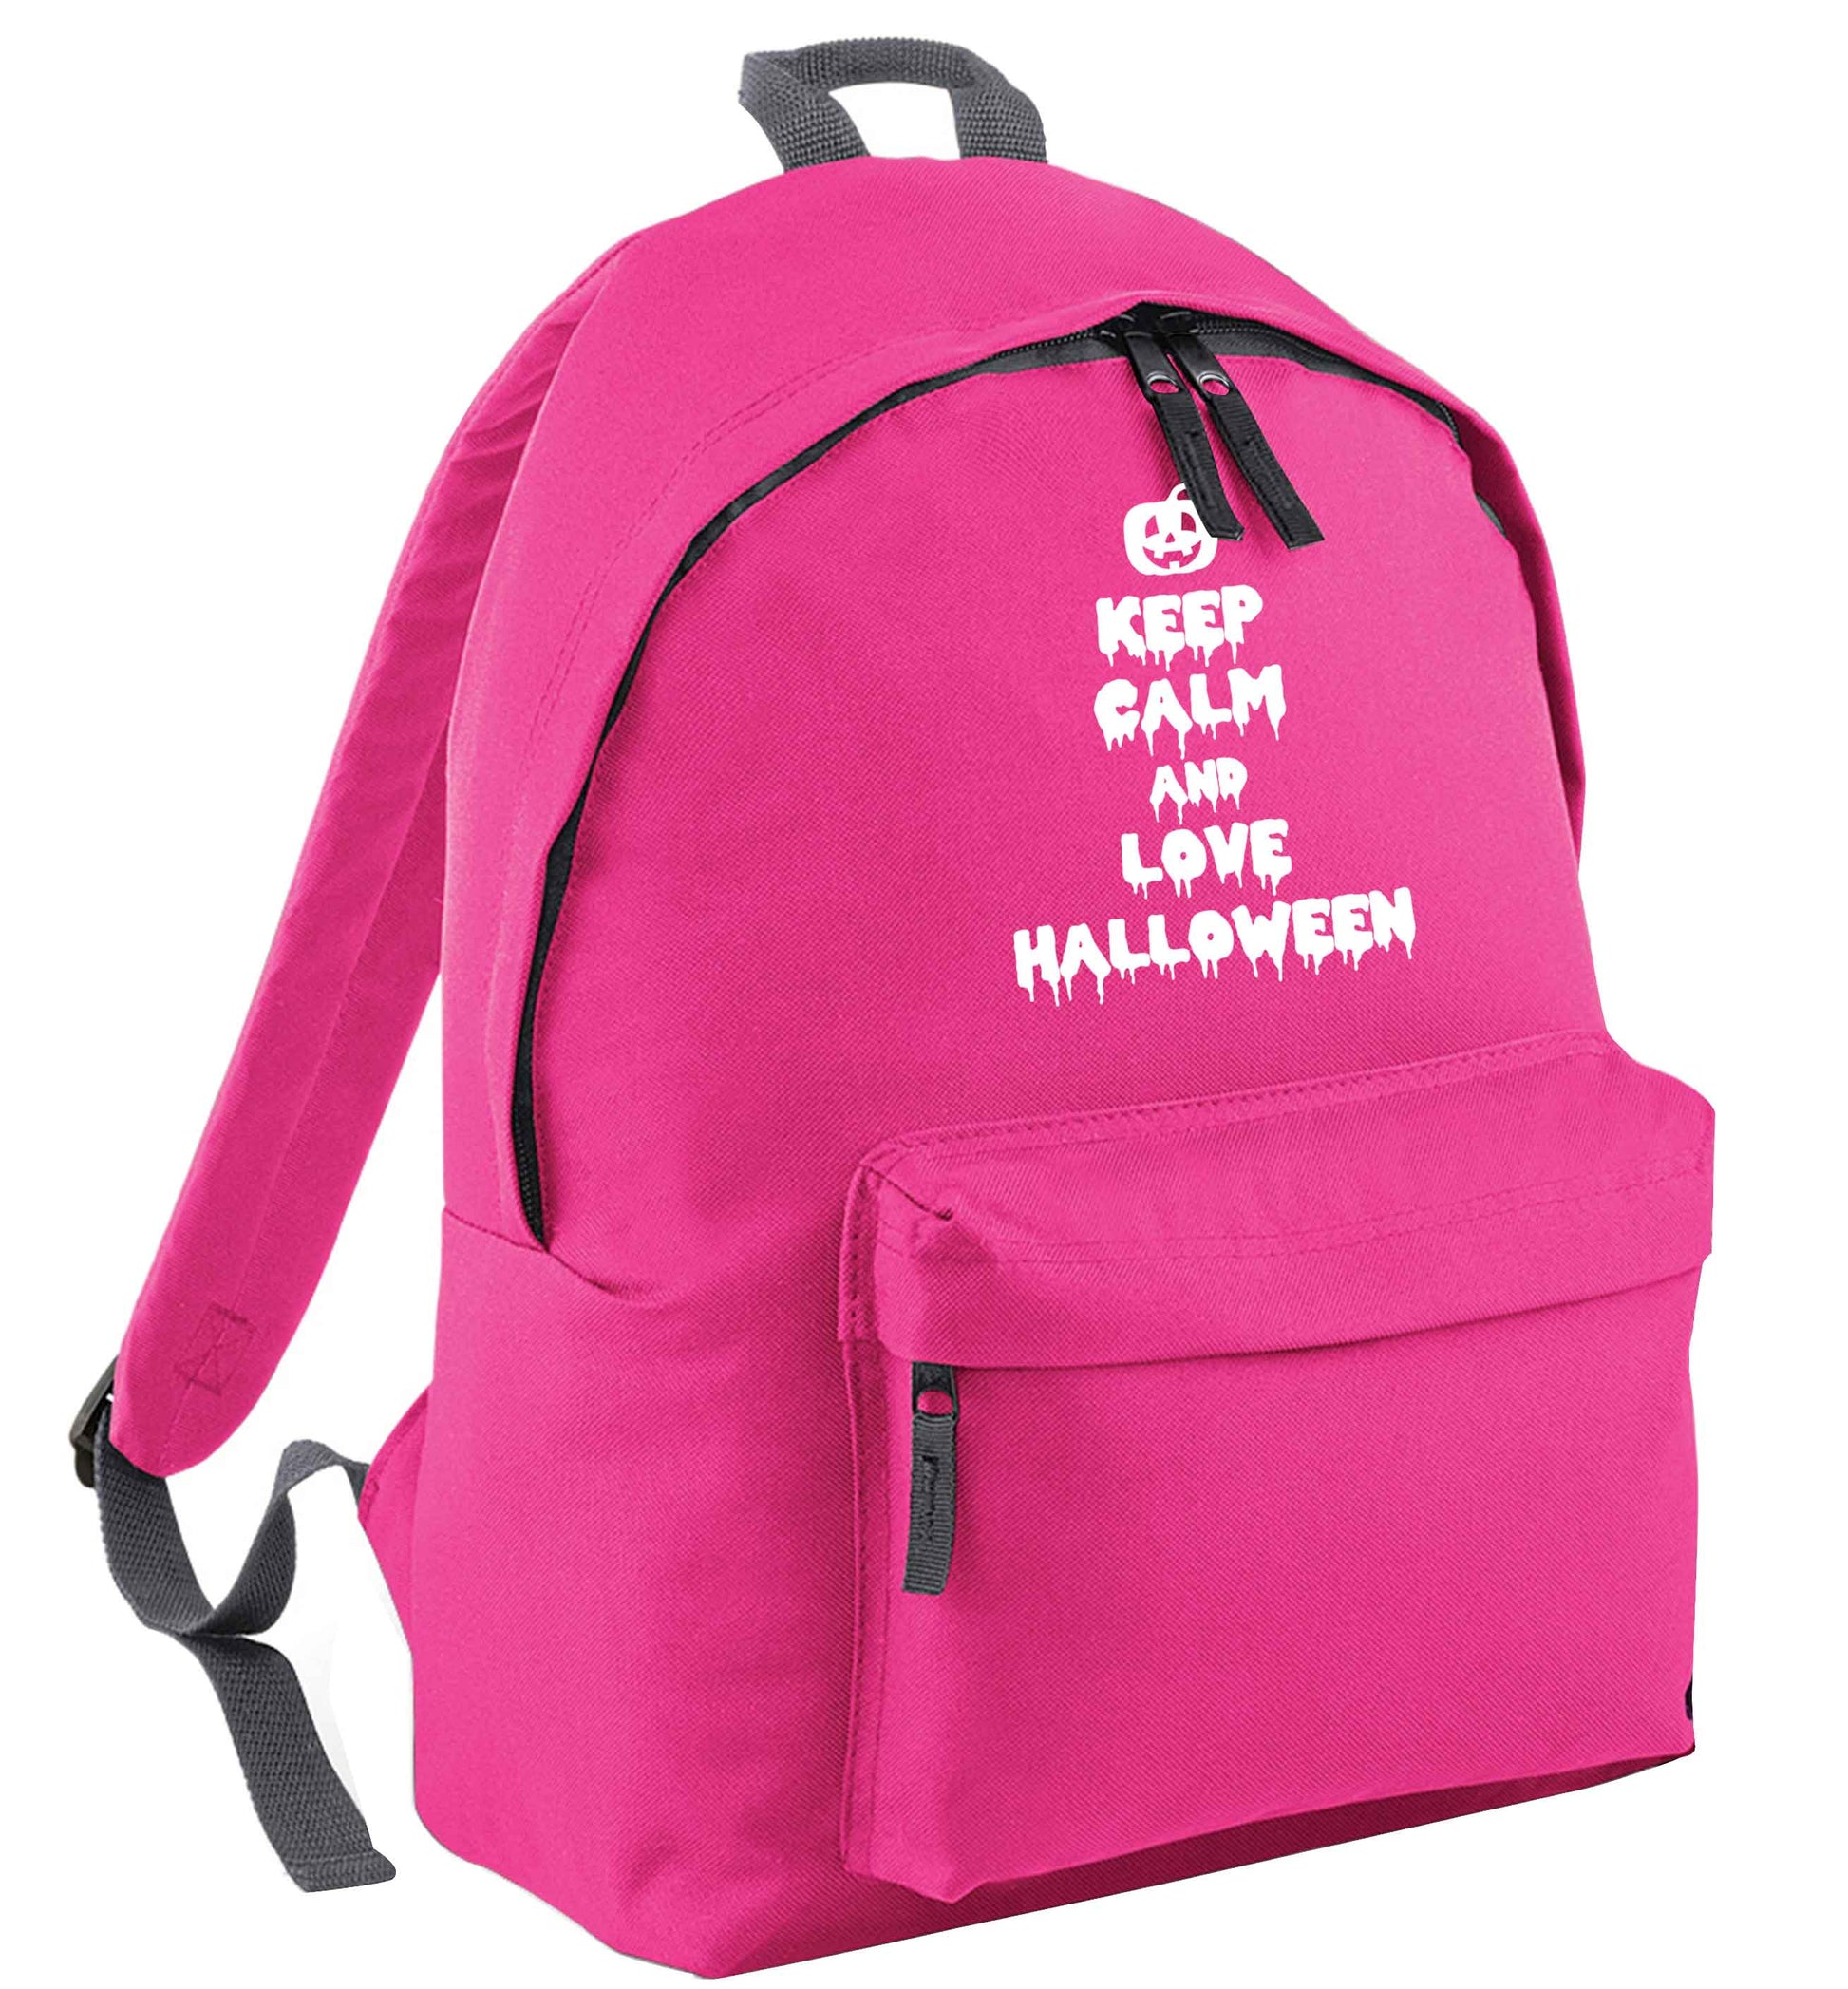 Keep calm and love halloween | Children's backpack